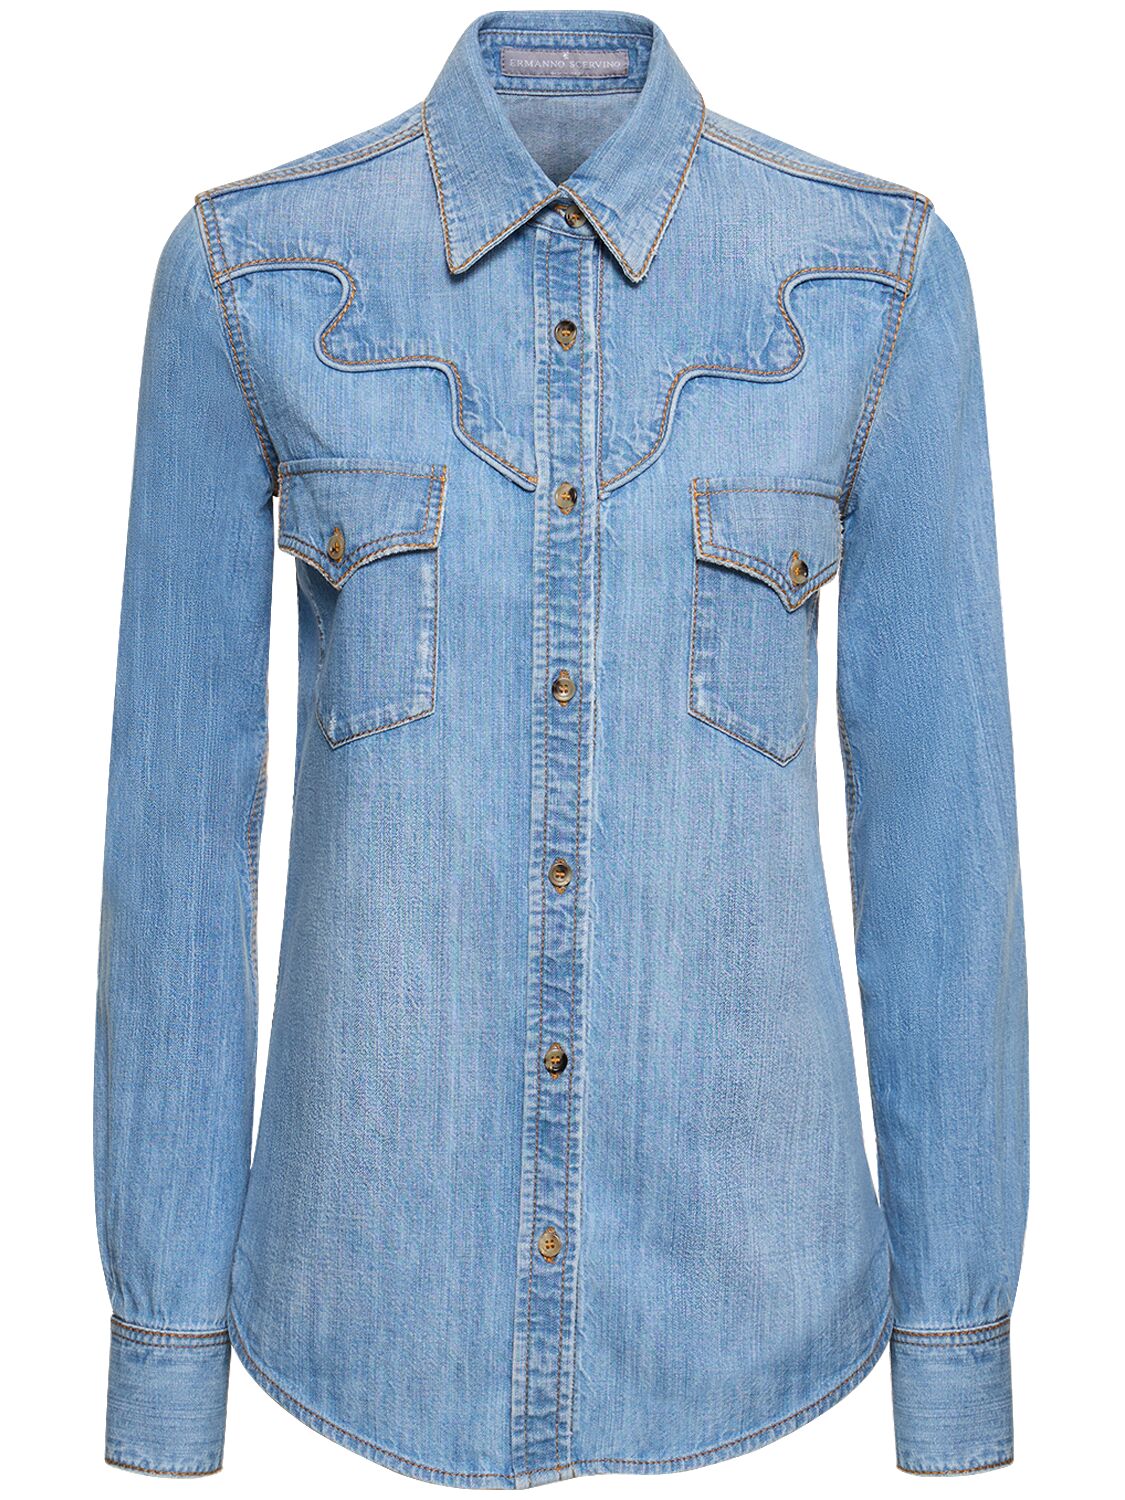 Image of Embroidered Cotton Denim Shirt